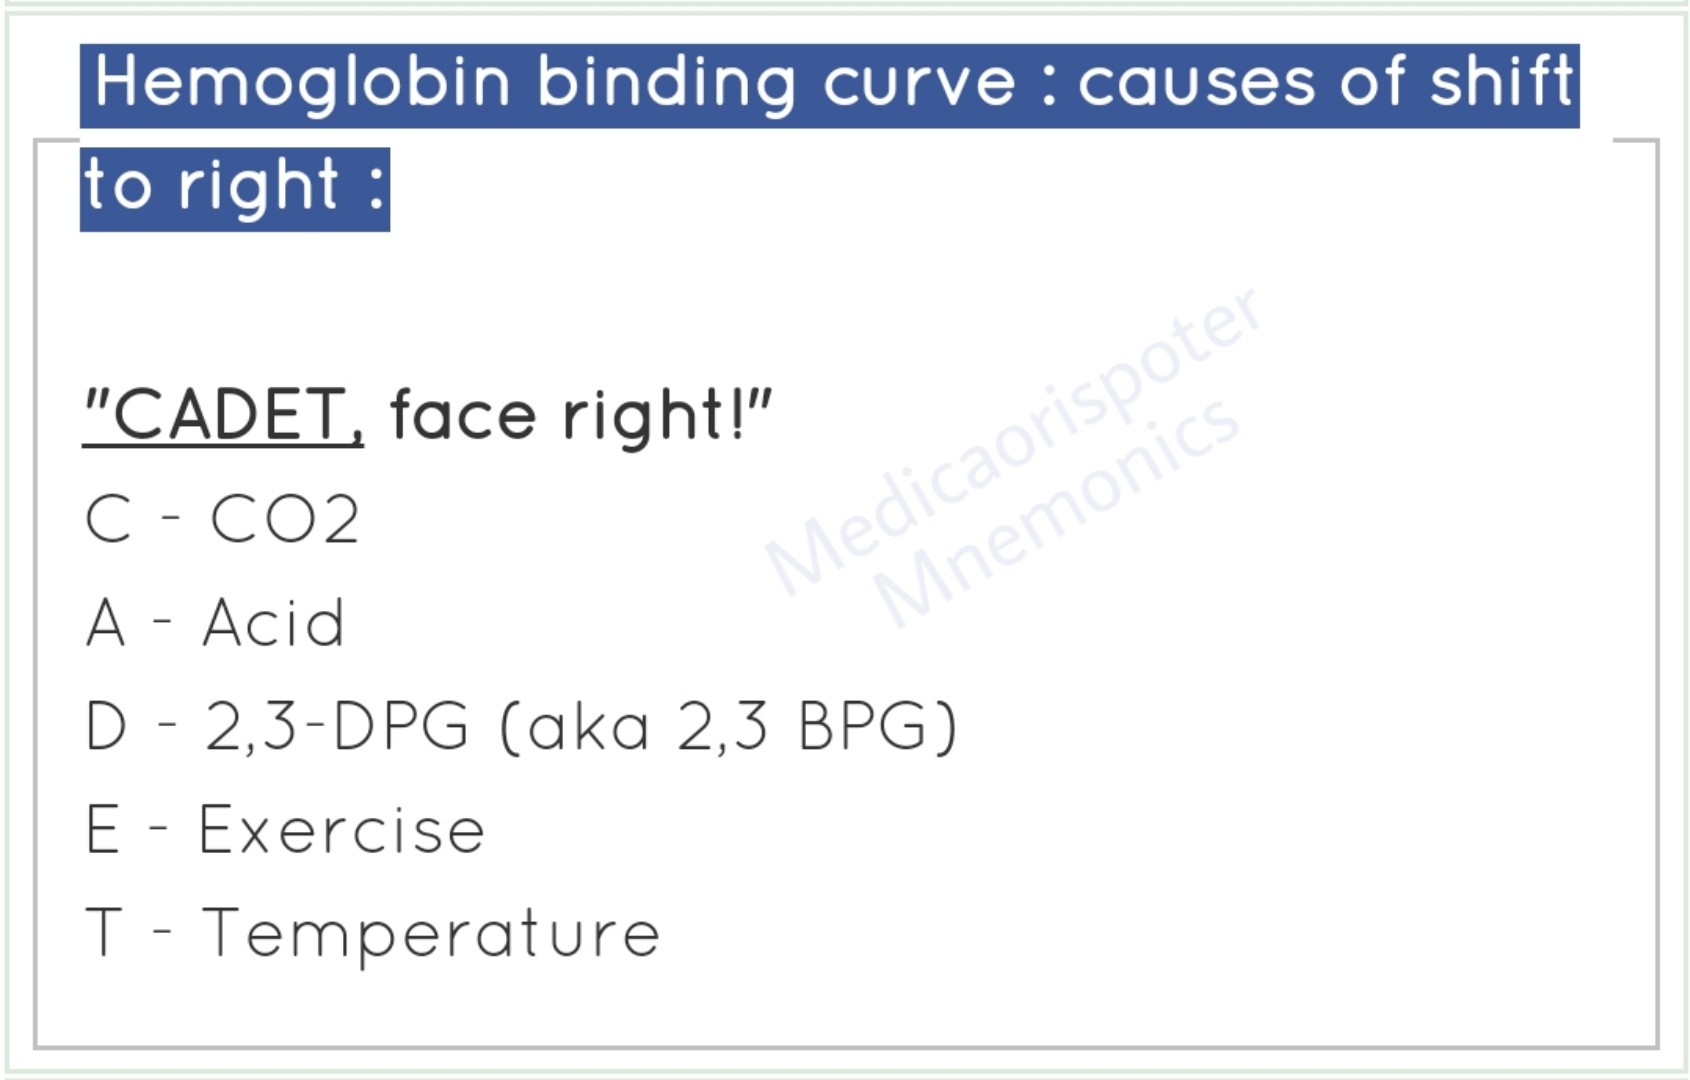 Hemoglobin binding Curve Causes of Shift to right